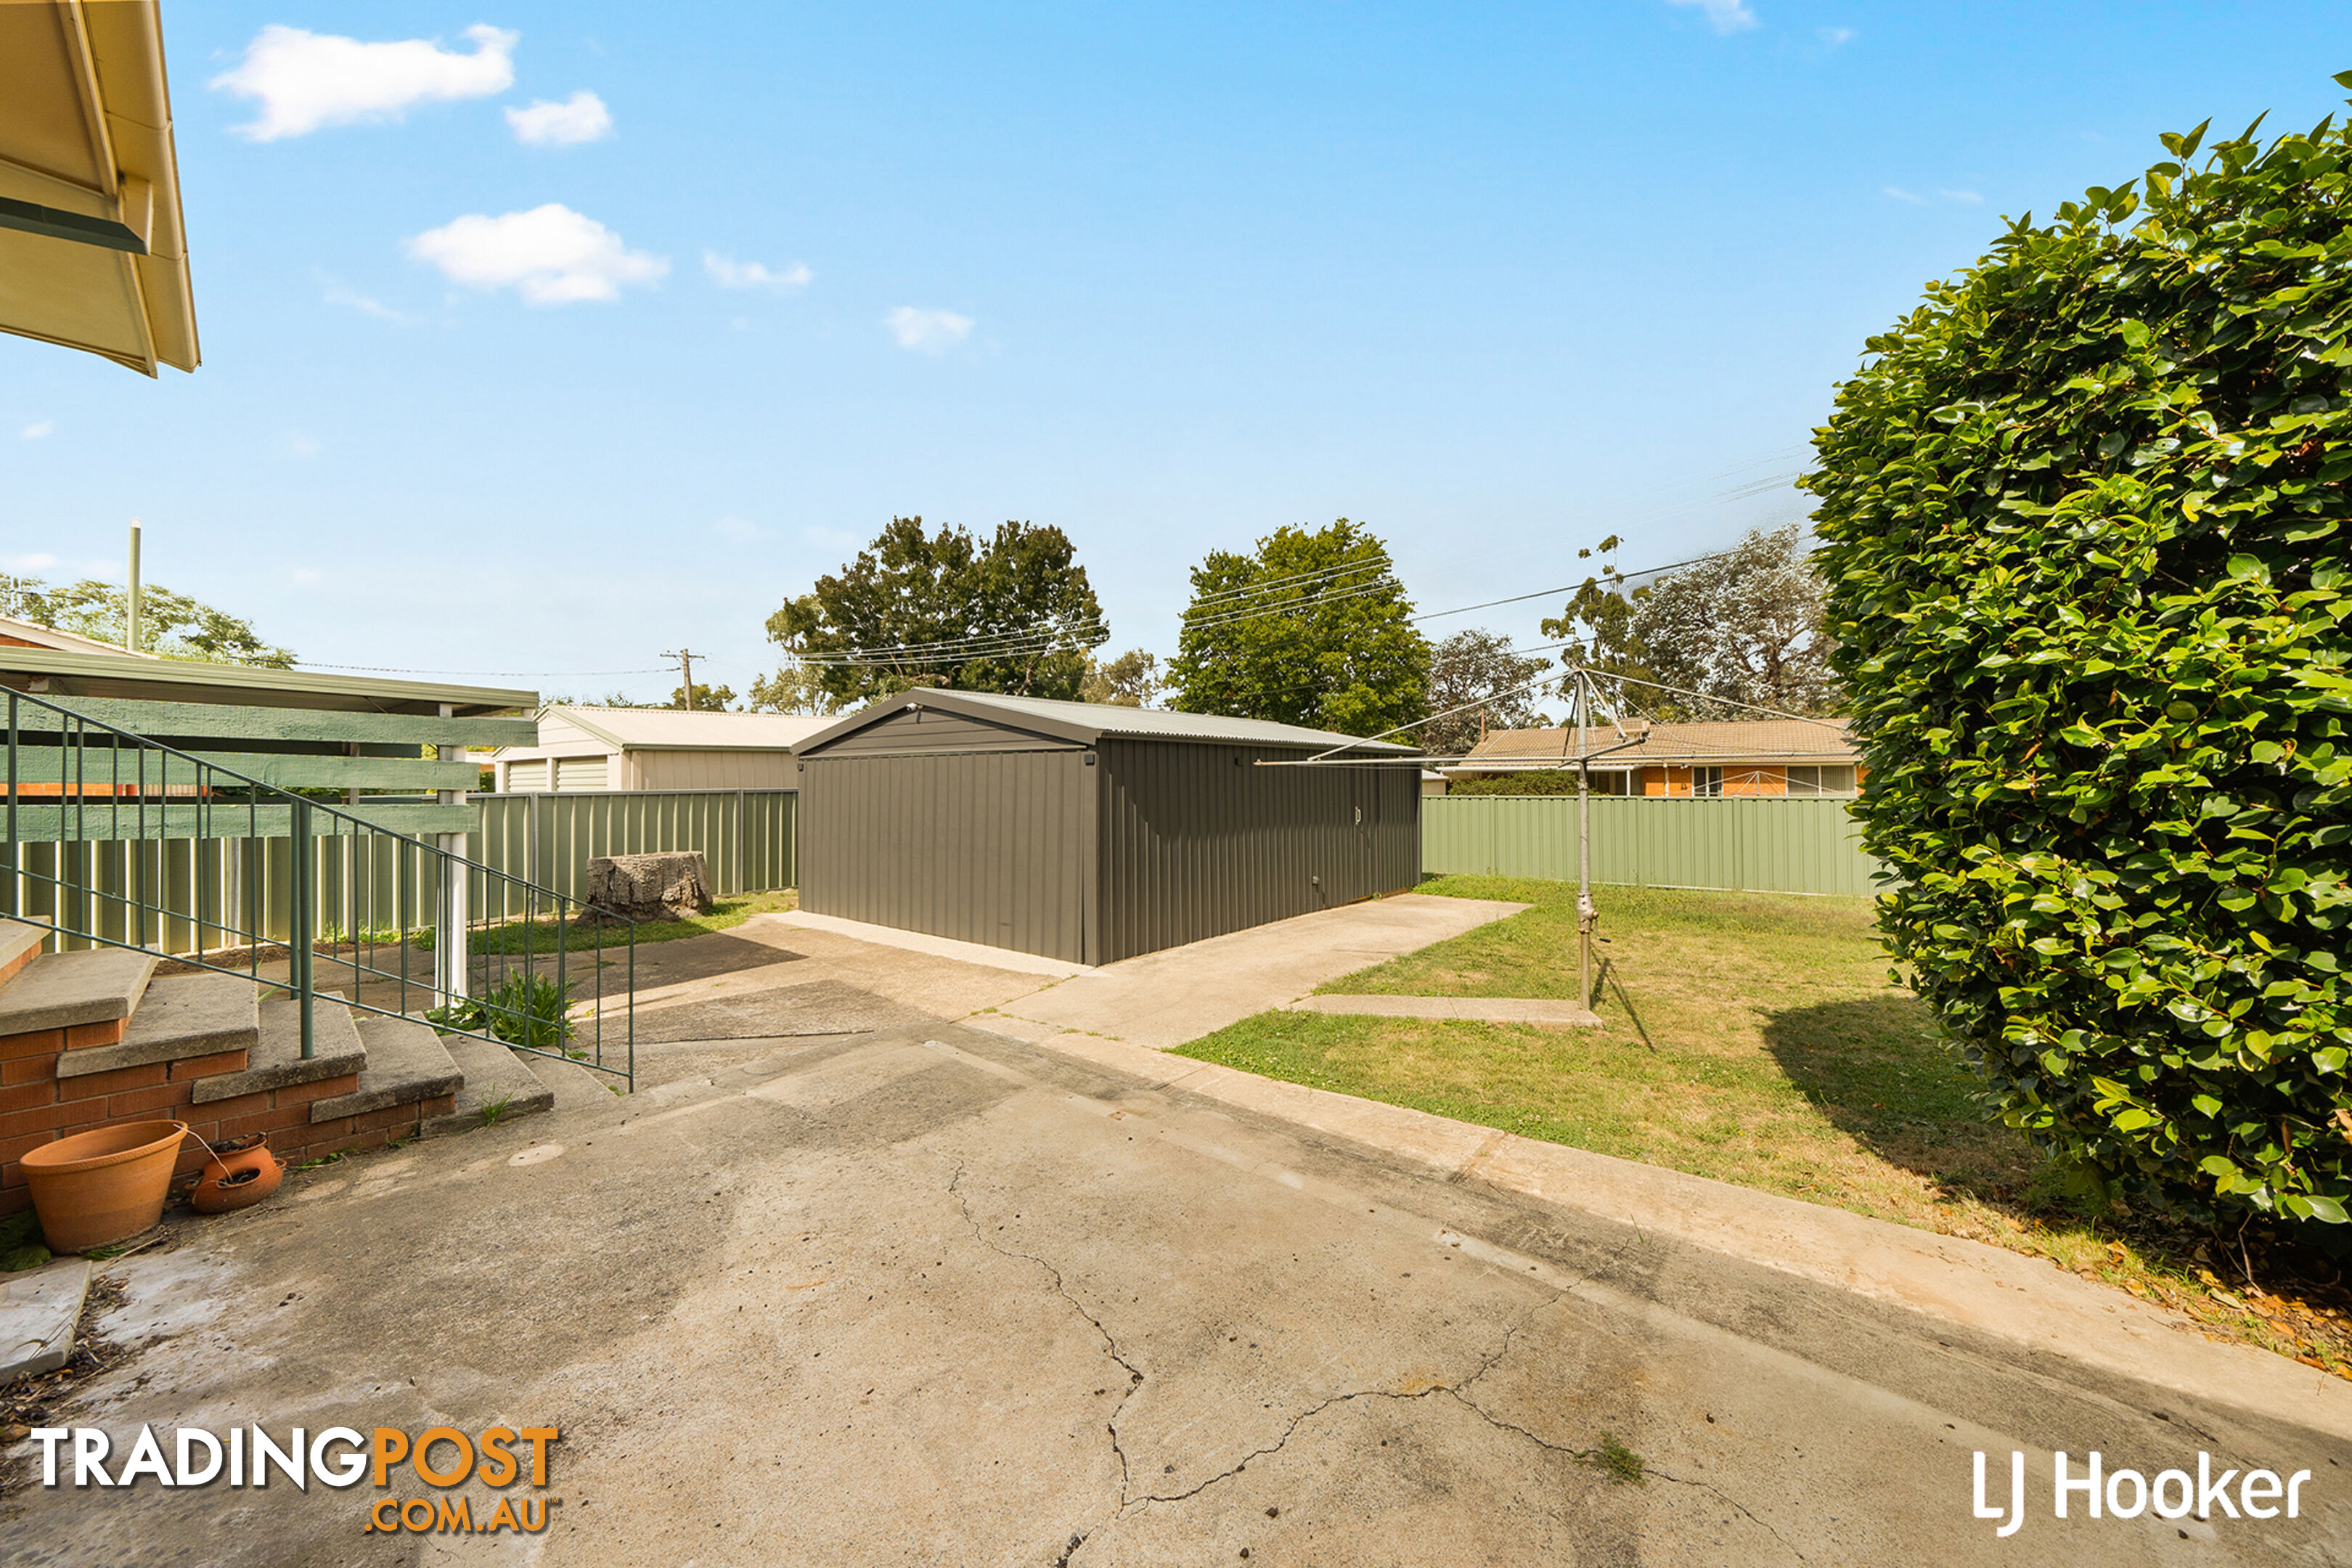 14 Mcmaster Street SCULLIN ACT 2614